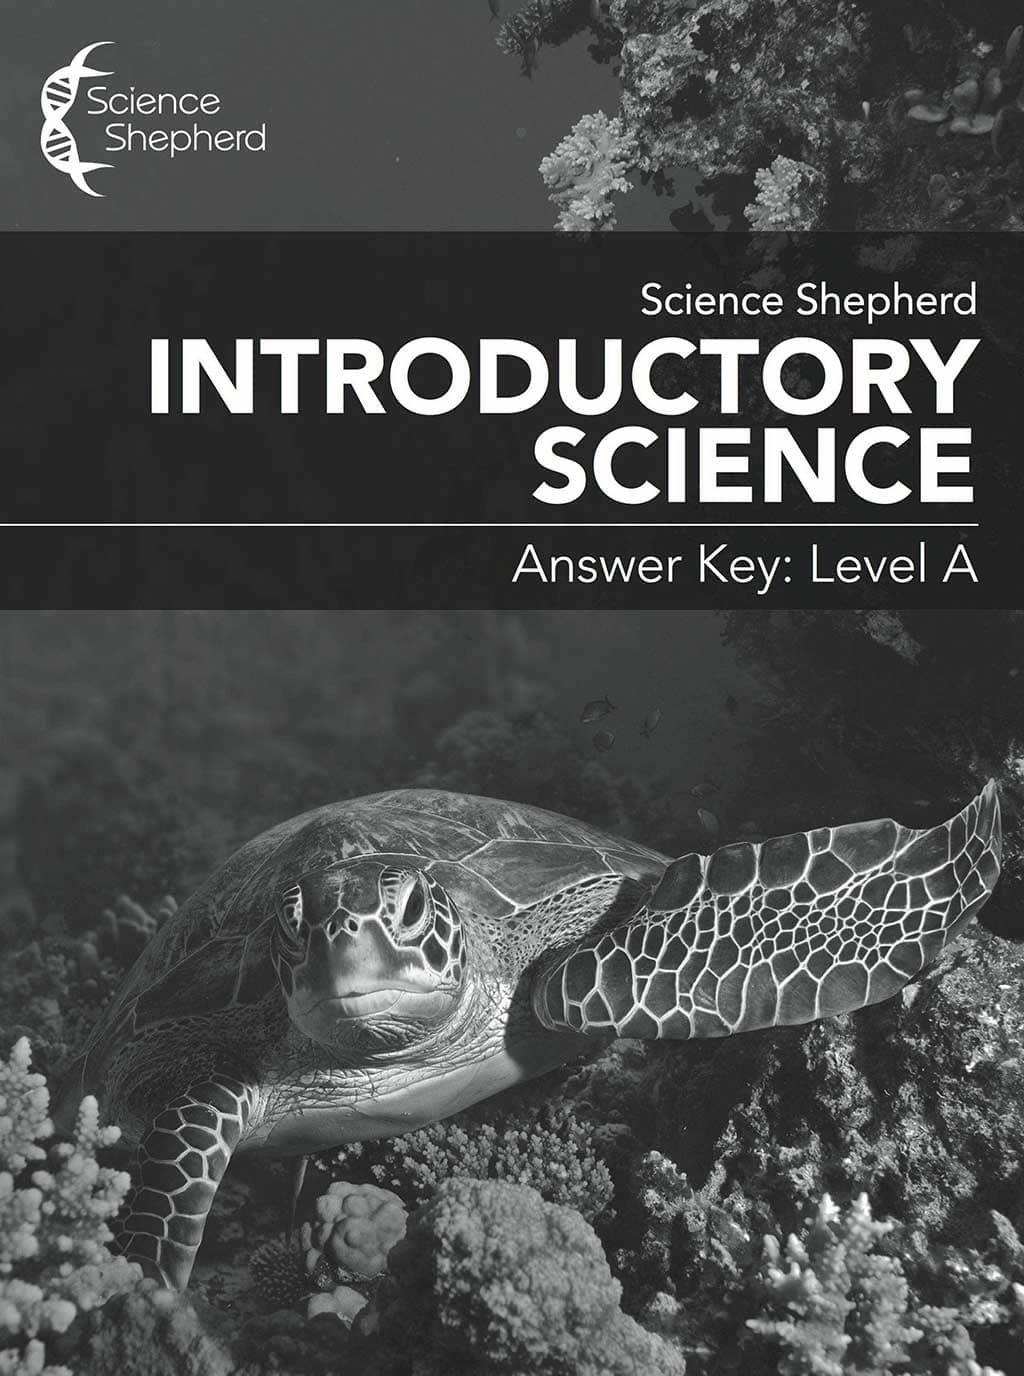 Christian science curriculum Answer Key Level A cover of a turtle in grayscale